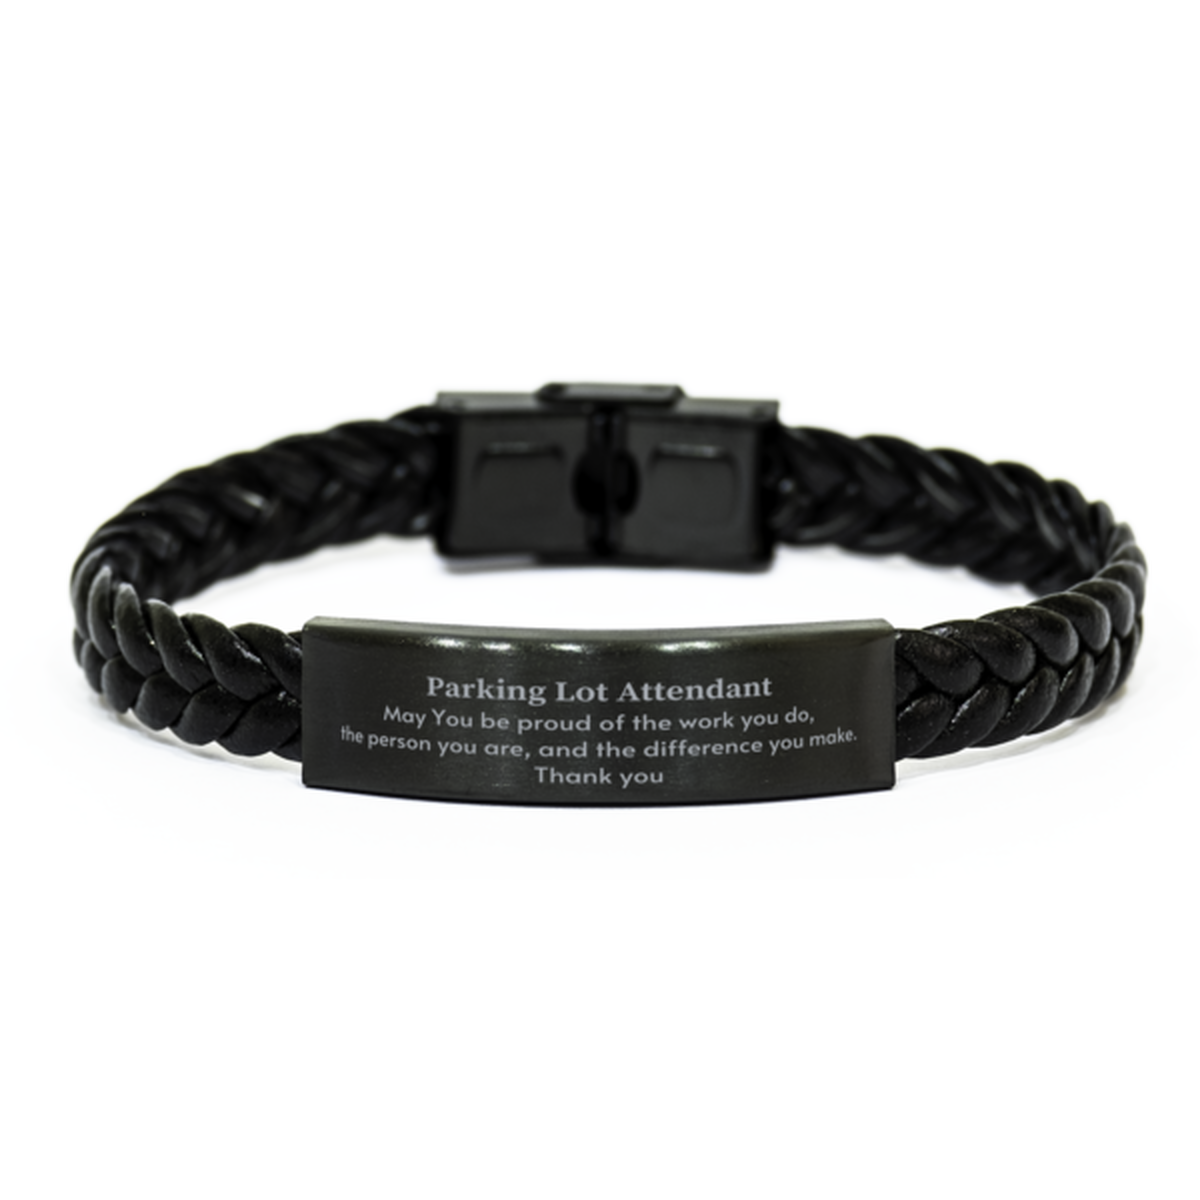 Heartwarming Braided Leather Bracelet Retirement Coworkers Gifts for Parking Lot Attendant, Parking Lot Attendant May You be proud of the work you do, the person you are Gifts for Boss Men Women Friends